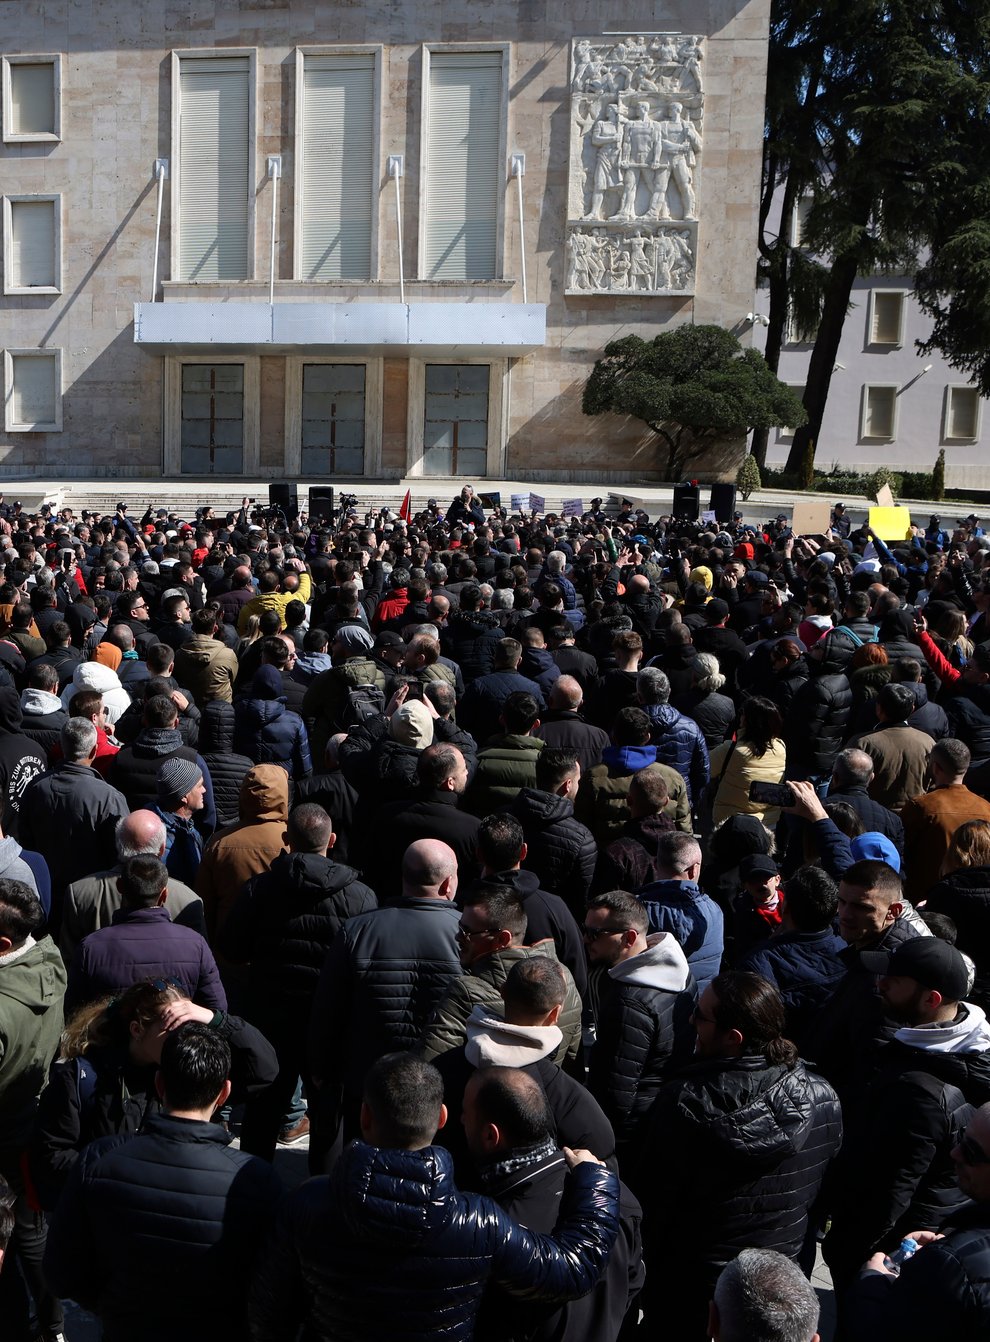 Protesters gather outside Prime Minister’s office during an anti-government rally in Tirana, Albania, Saturday, March 12, 2022. Thousands of Albanians are holding on Saturday a protest in the capital Tirana against recent price hikes that authorities blame on the war in Ukraine. (AP Photo/Franc Zhurda)